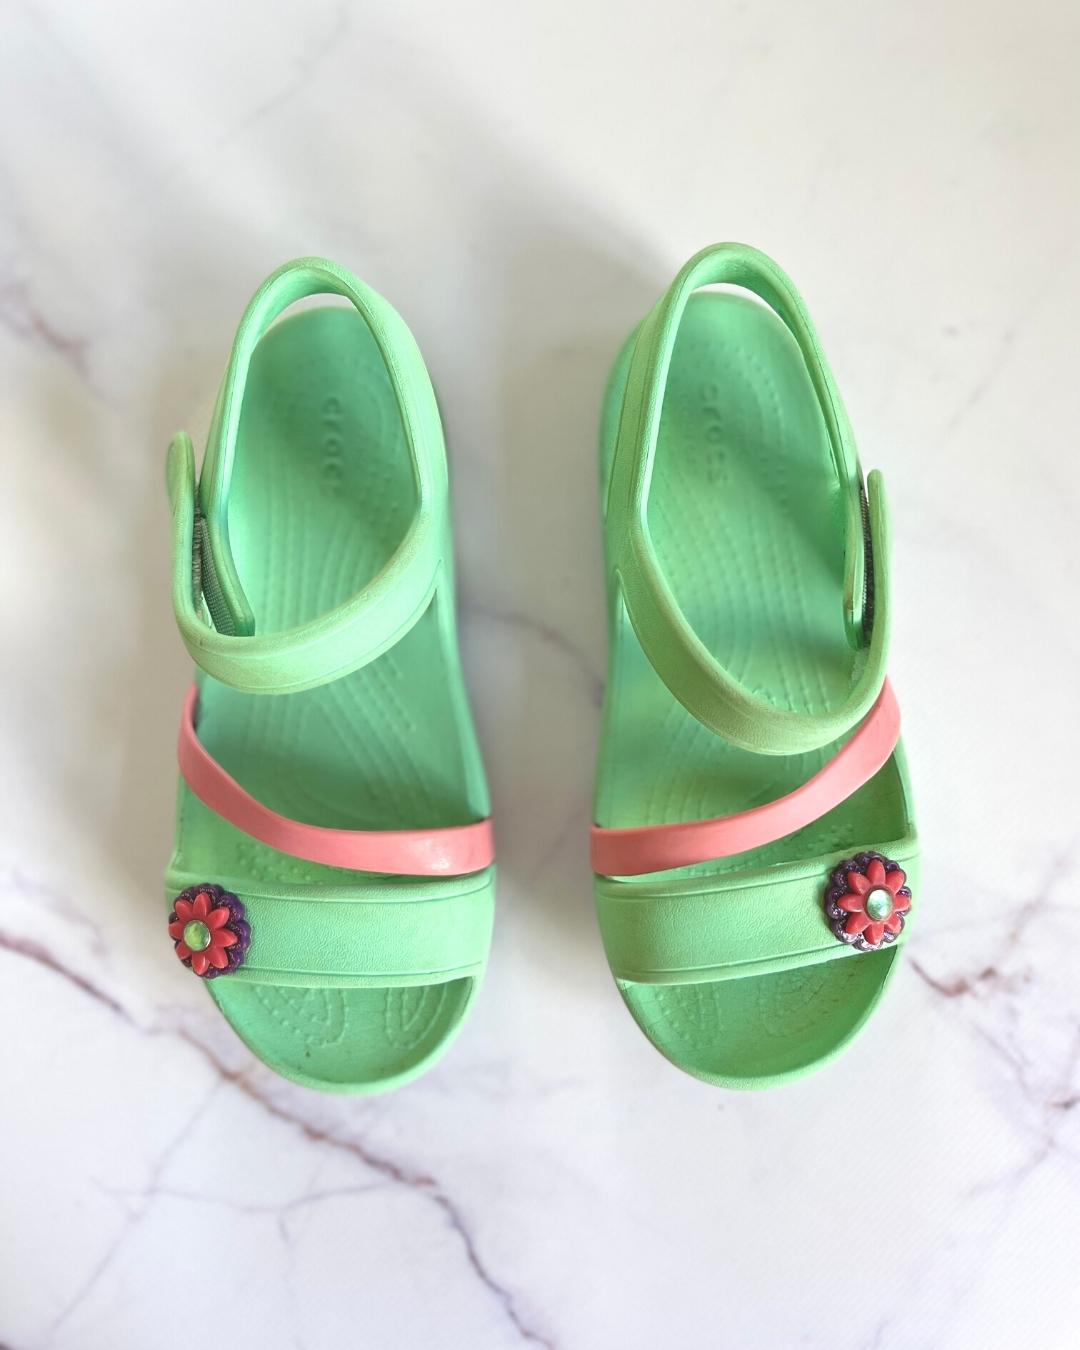 Crocs green flower shoes Size 13 - Nearly New Kids